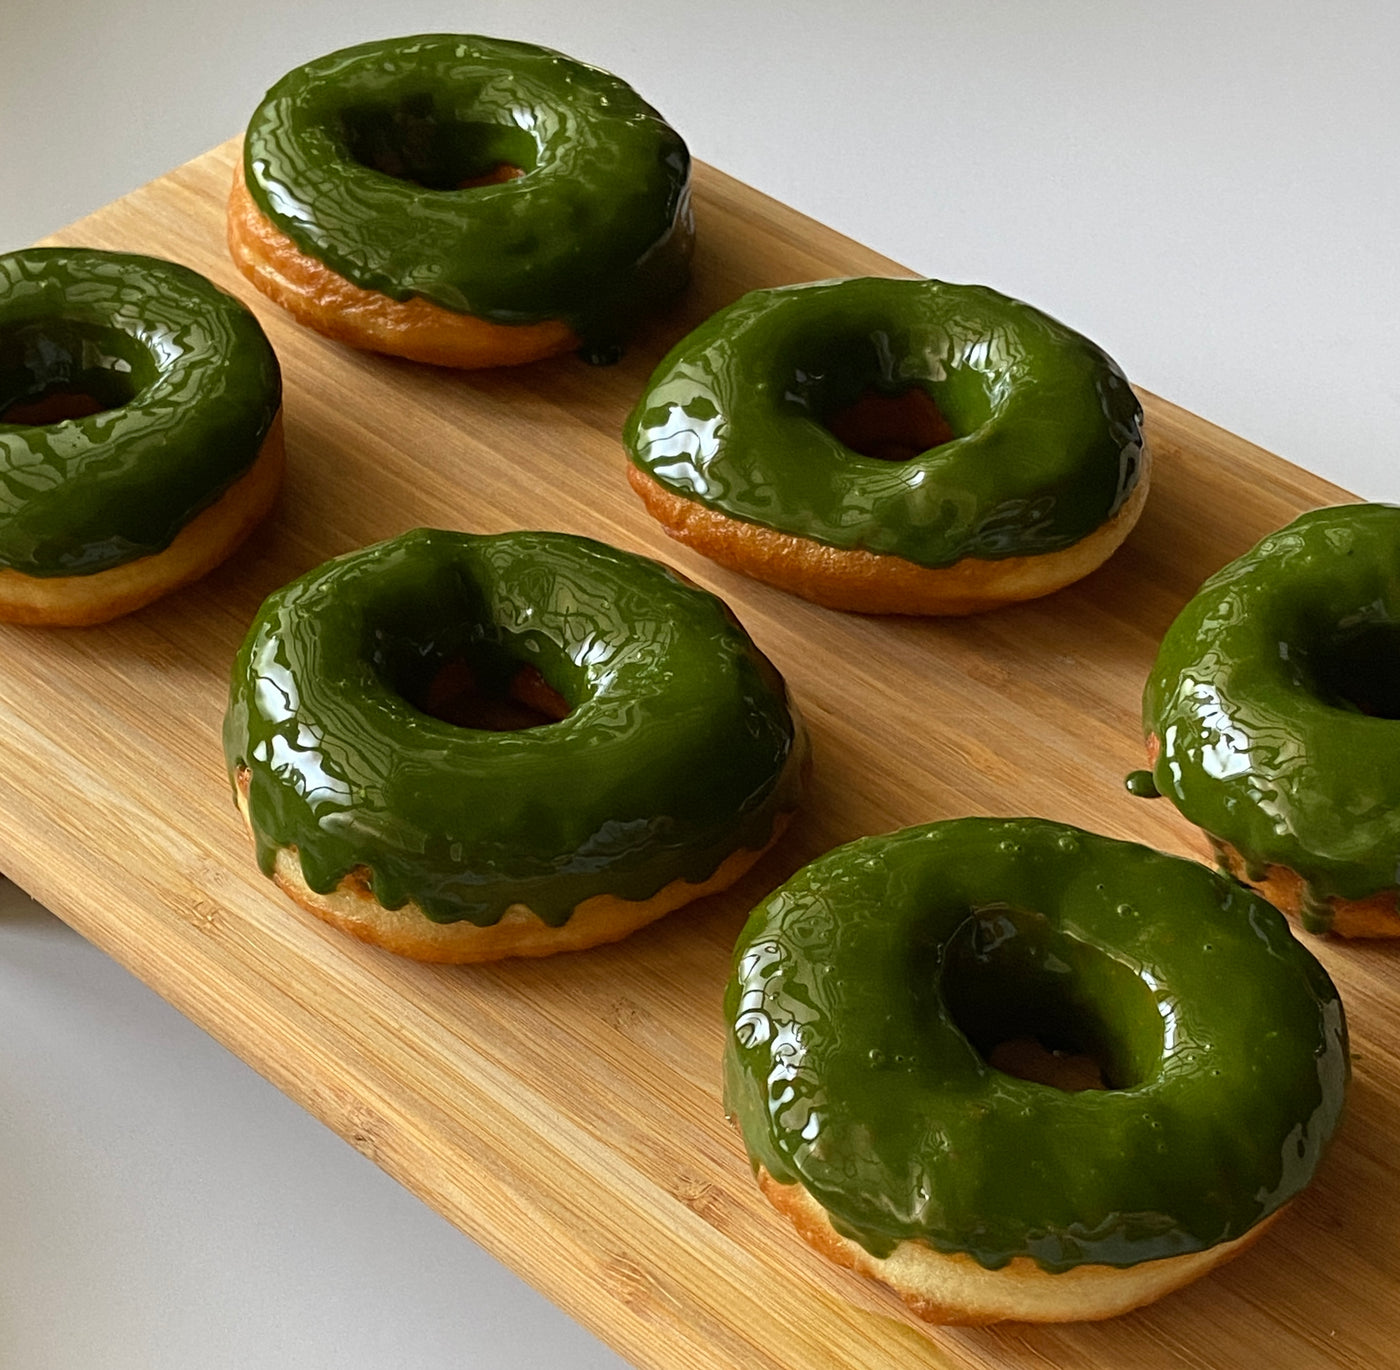 Matcha Glazed Doughnuts | Fried, Fun and Fluffy in Just A Few Minutes!